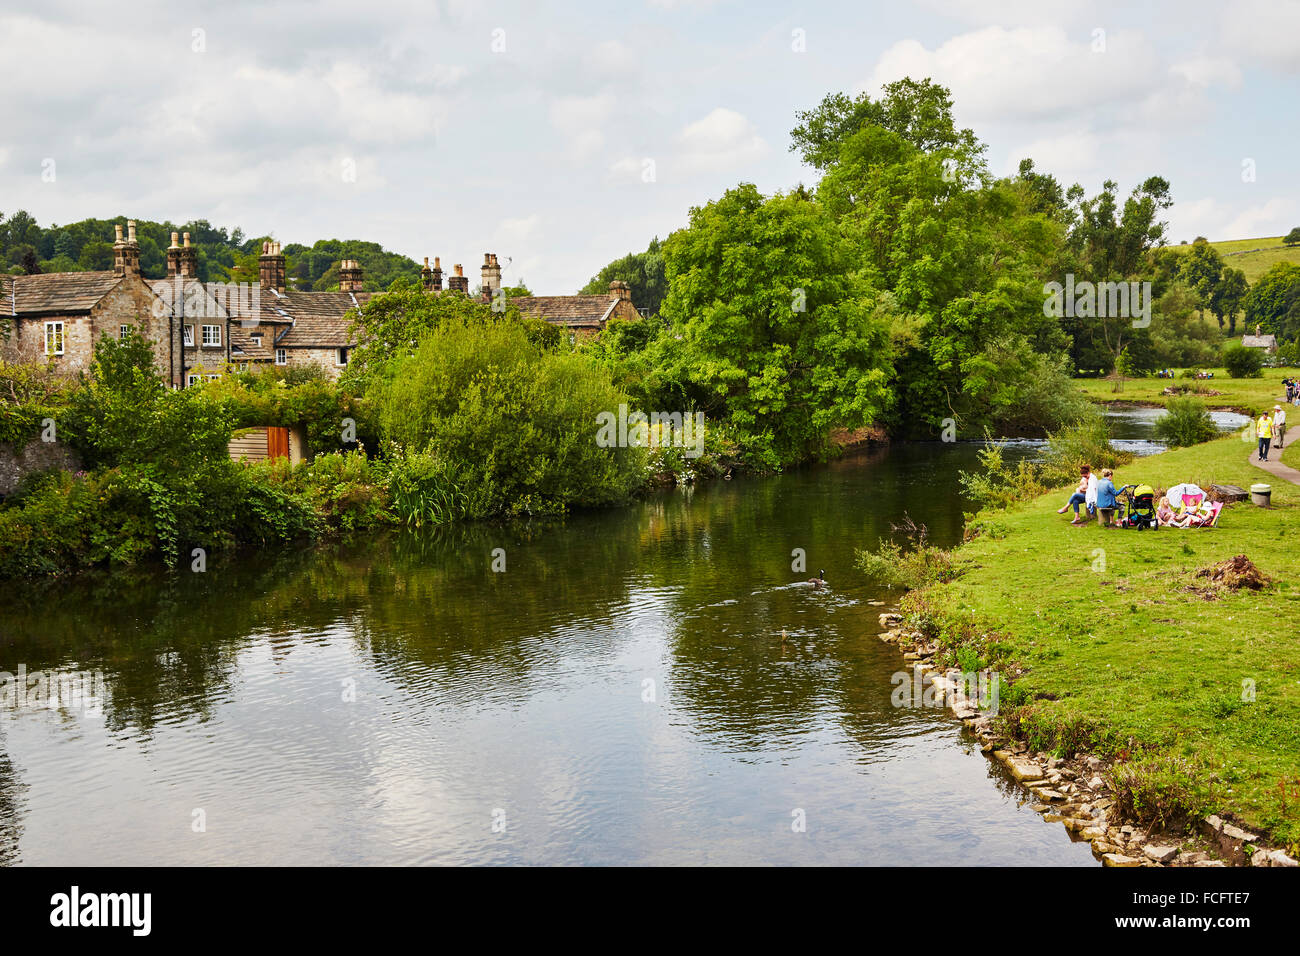 View of the River Wye from the old 13th century bridge in Bakewell, Derbyshire, England, UK. Stock Photo